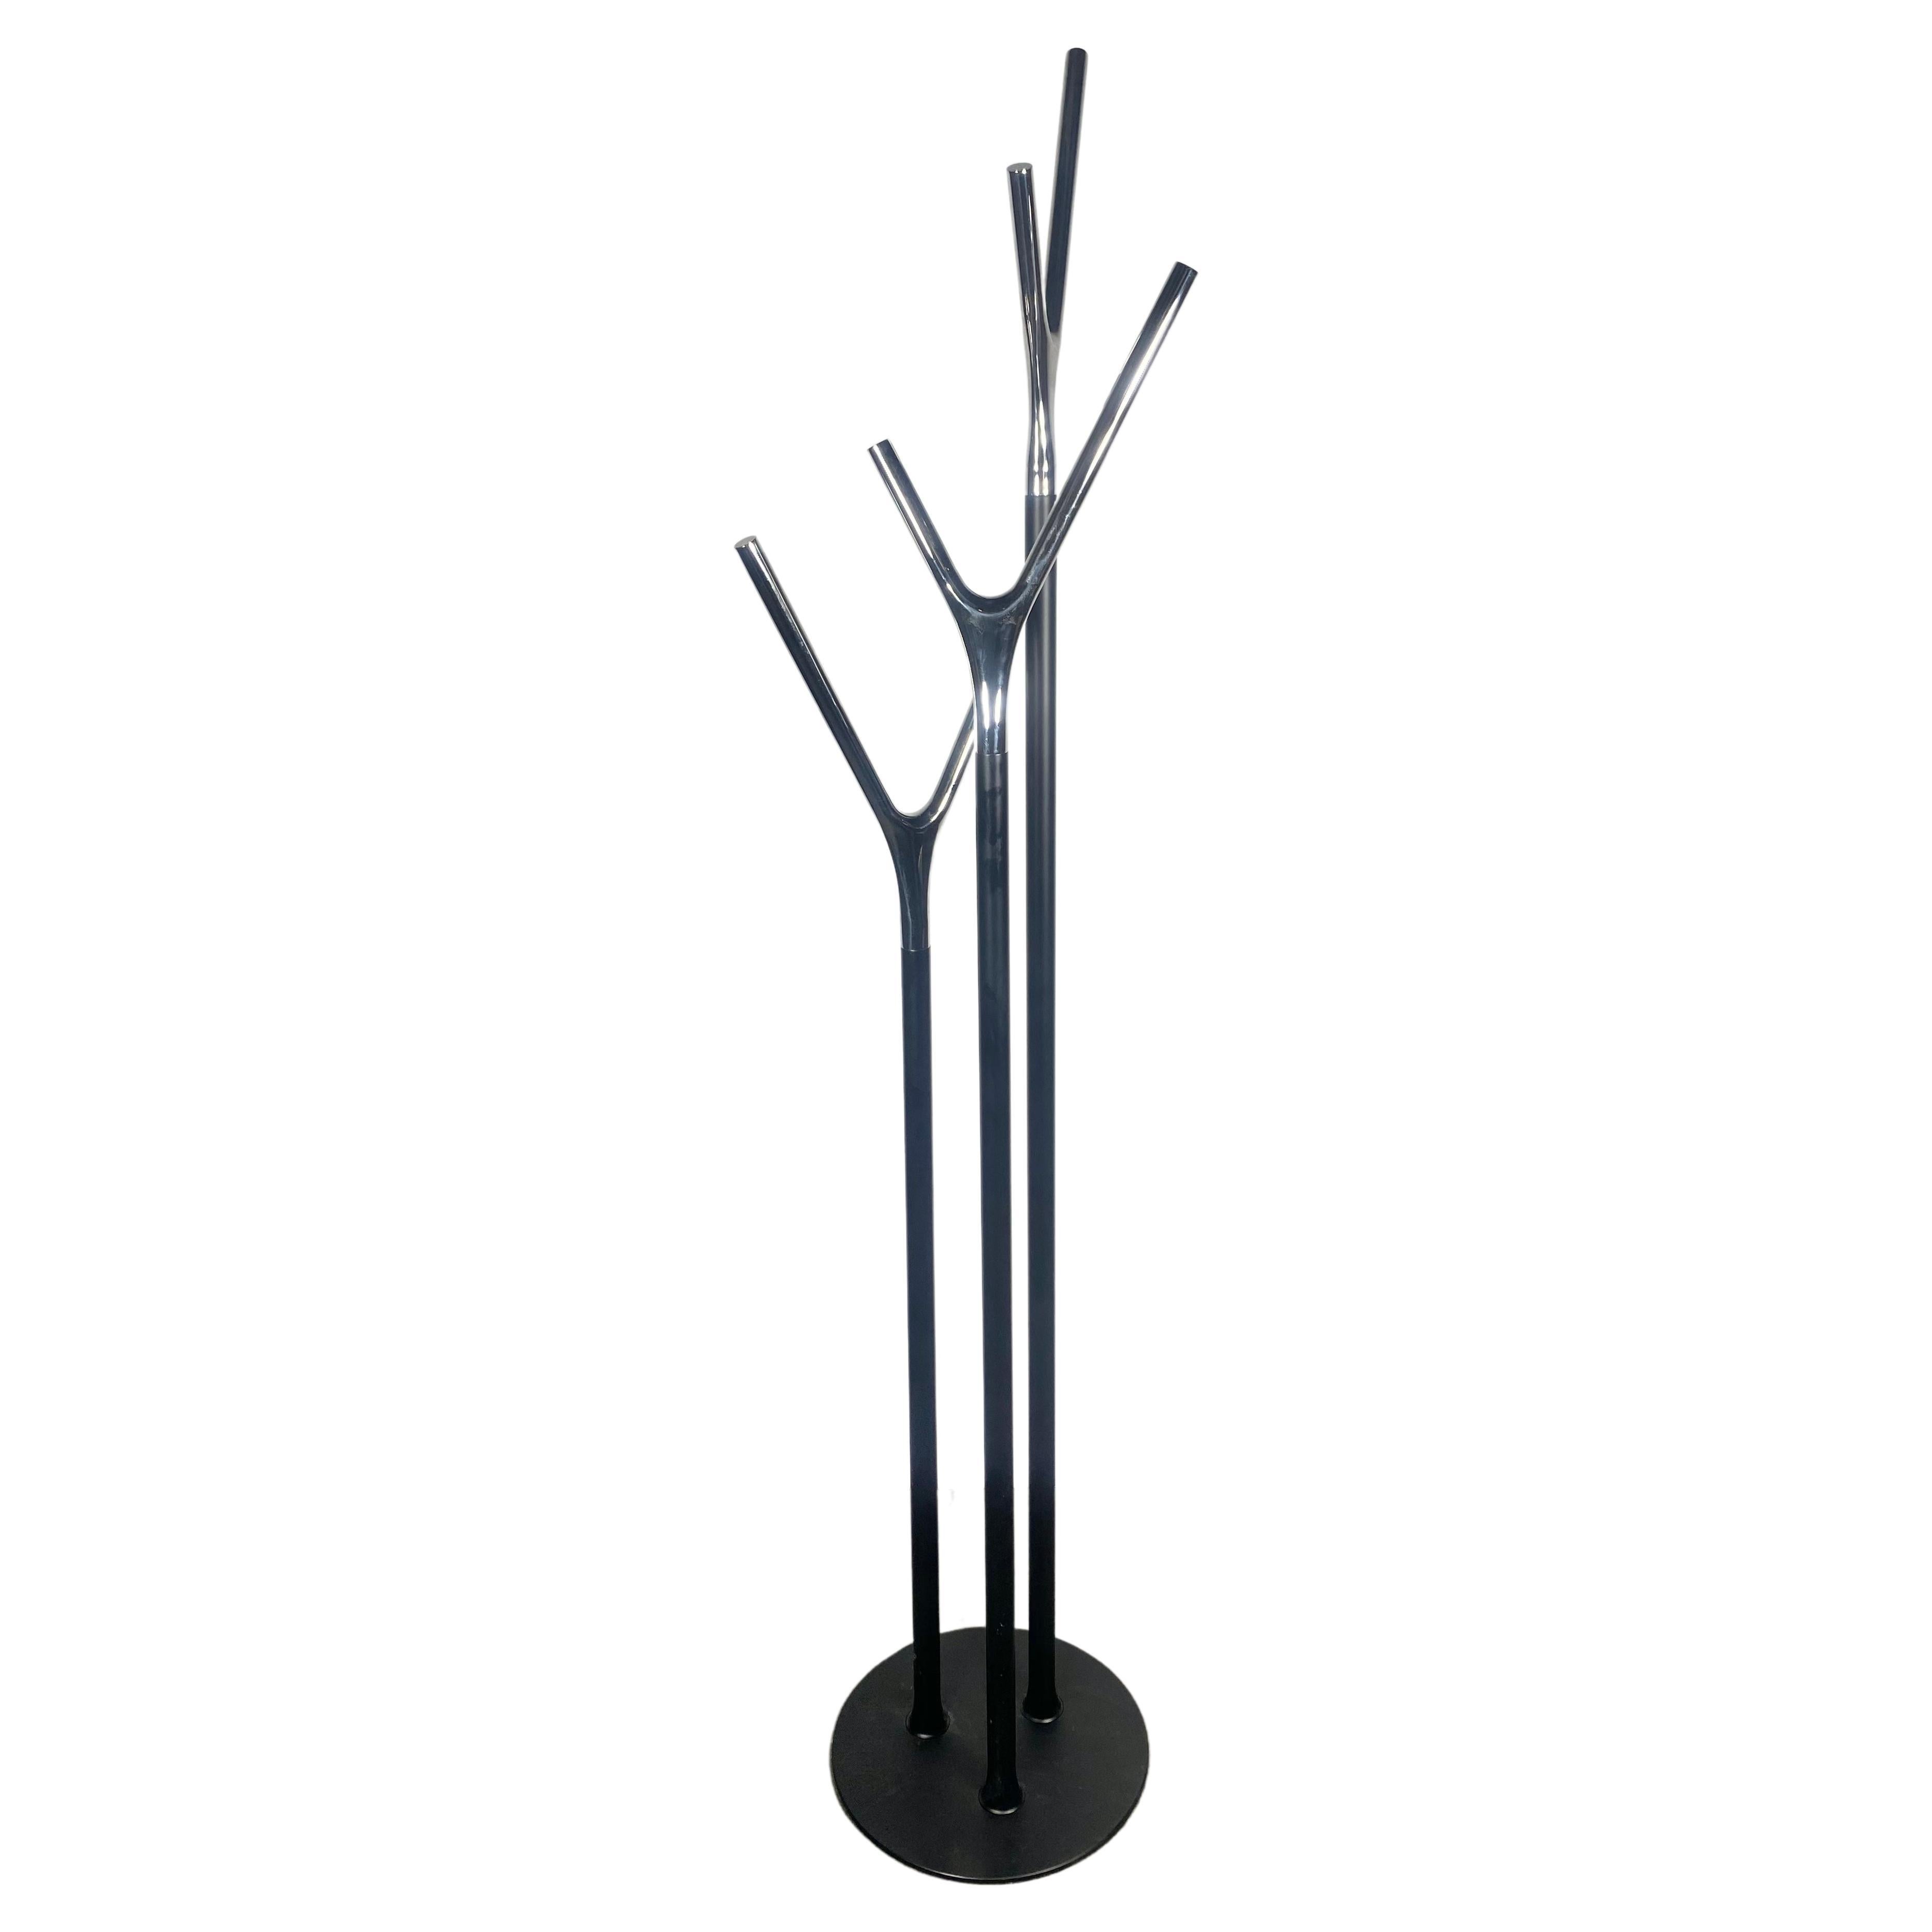 Modernist Contemporary Wishbone Coat Stand - Mirror Chrome by Busk+Hertzog For Sale